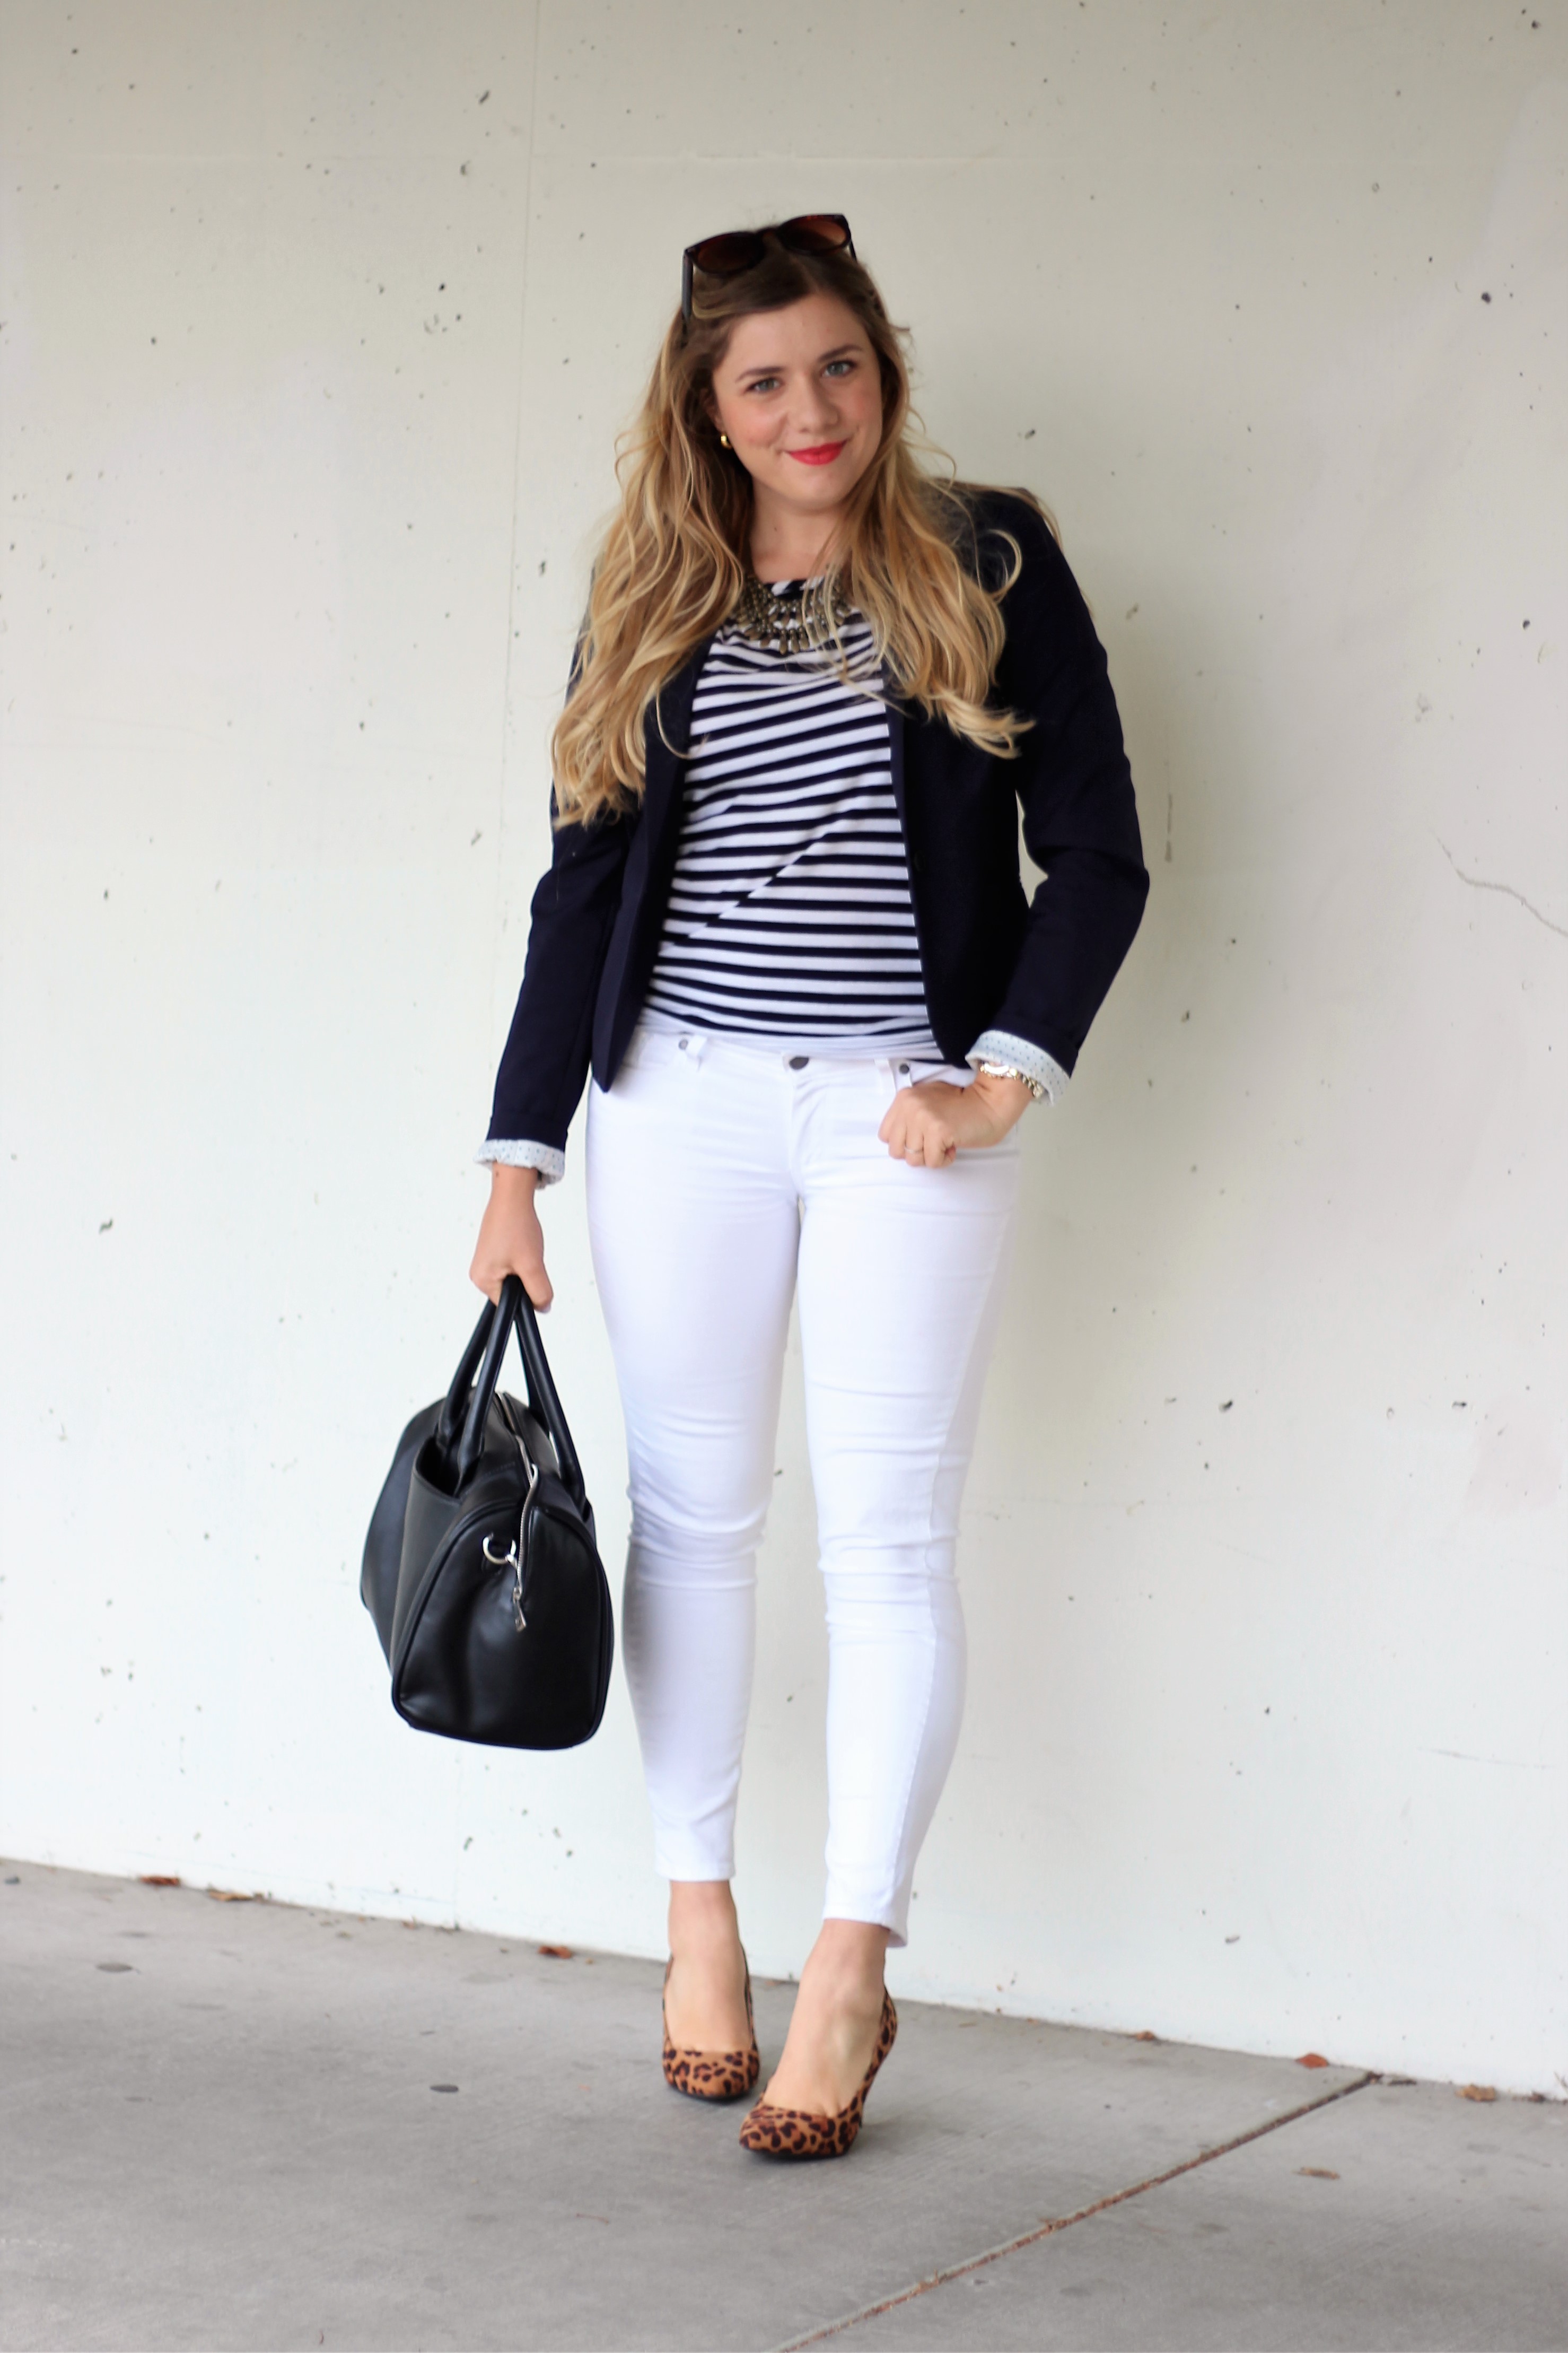 white jeans after labor day - preppy style - cute and preppy outfit - white jeans - leopard heels